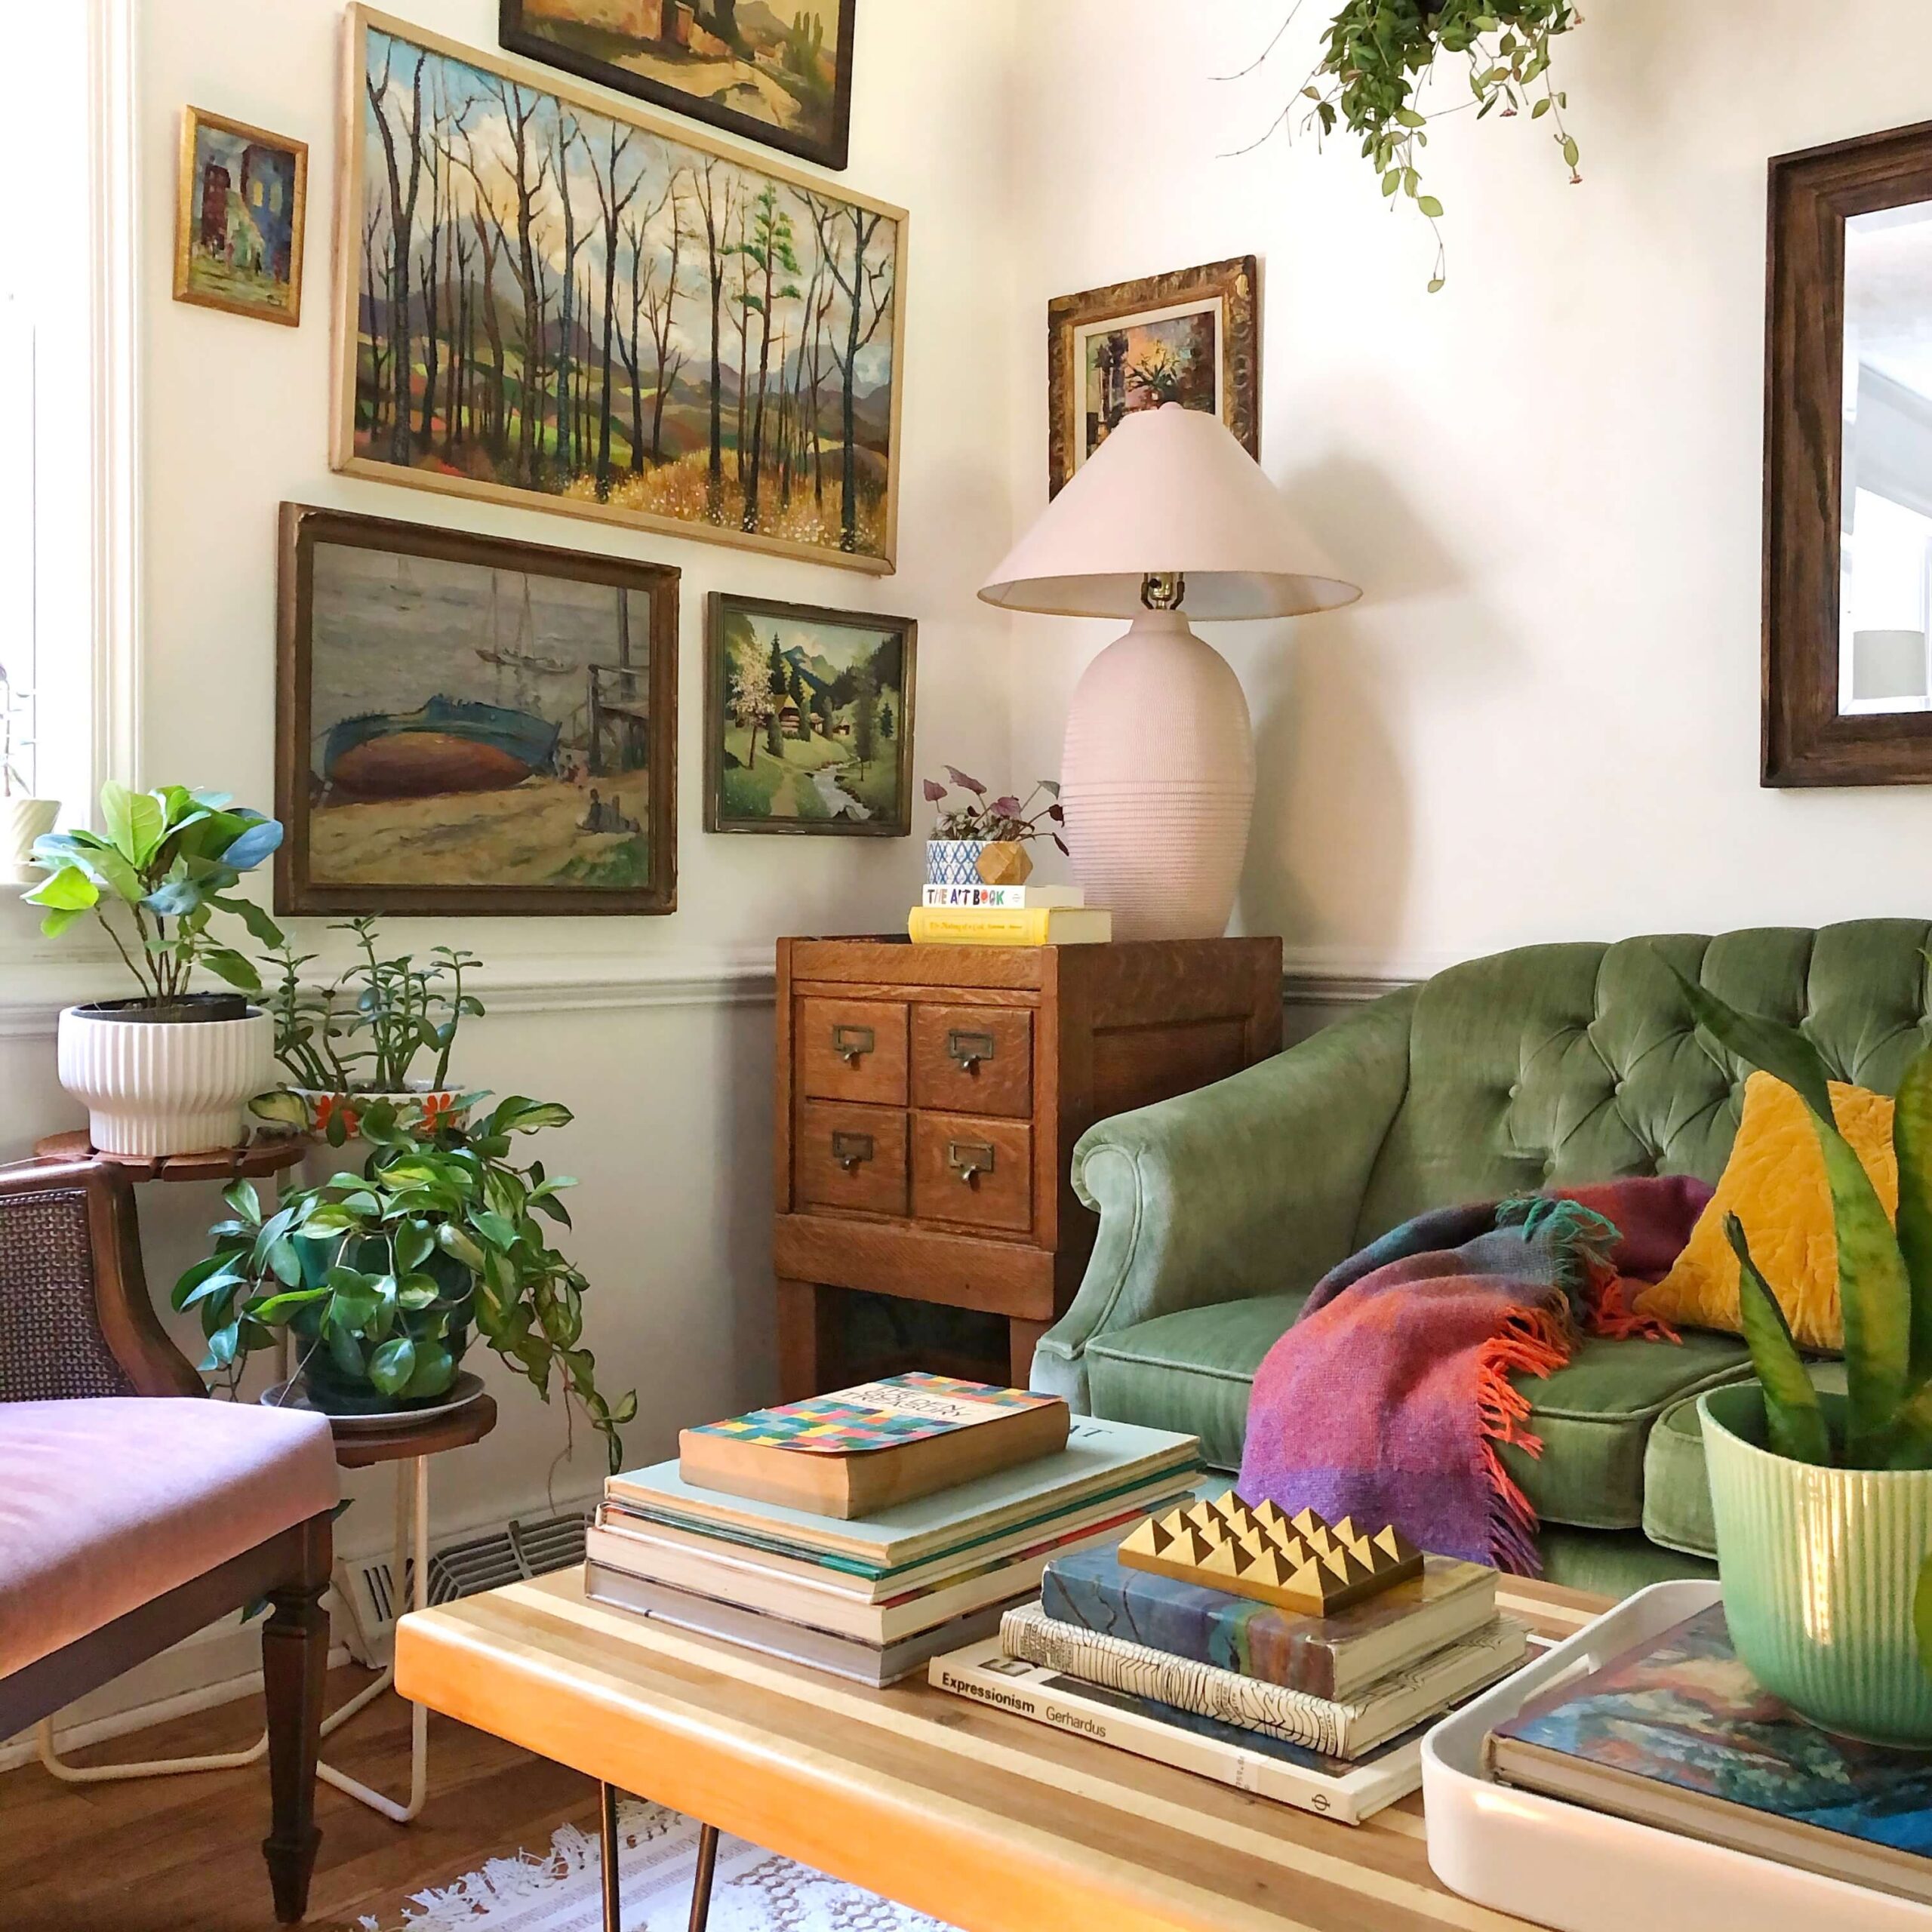 How To Decorate Your Home With Antiques And Vintage Finds